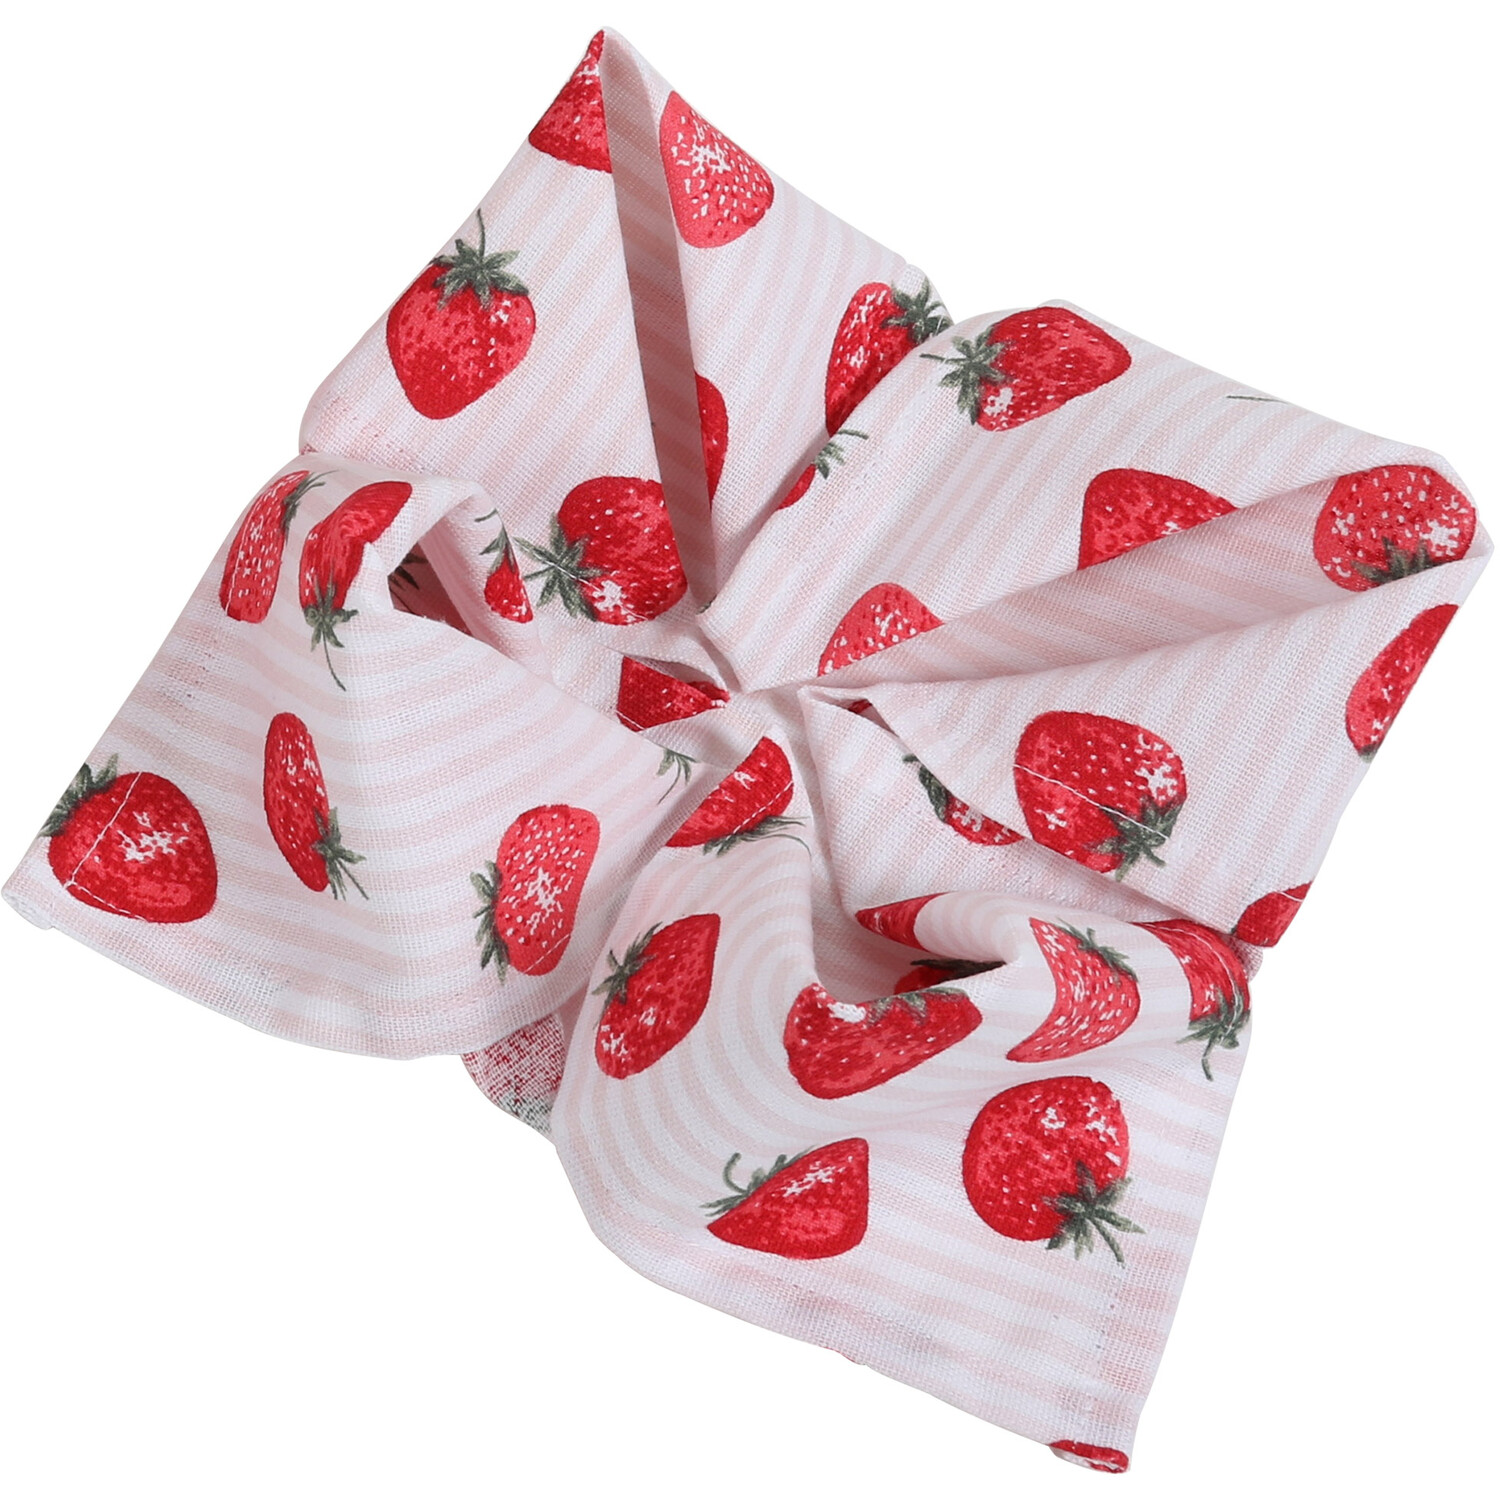 Pack of 2 Strawberry Napkins - Red Image 6